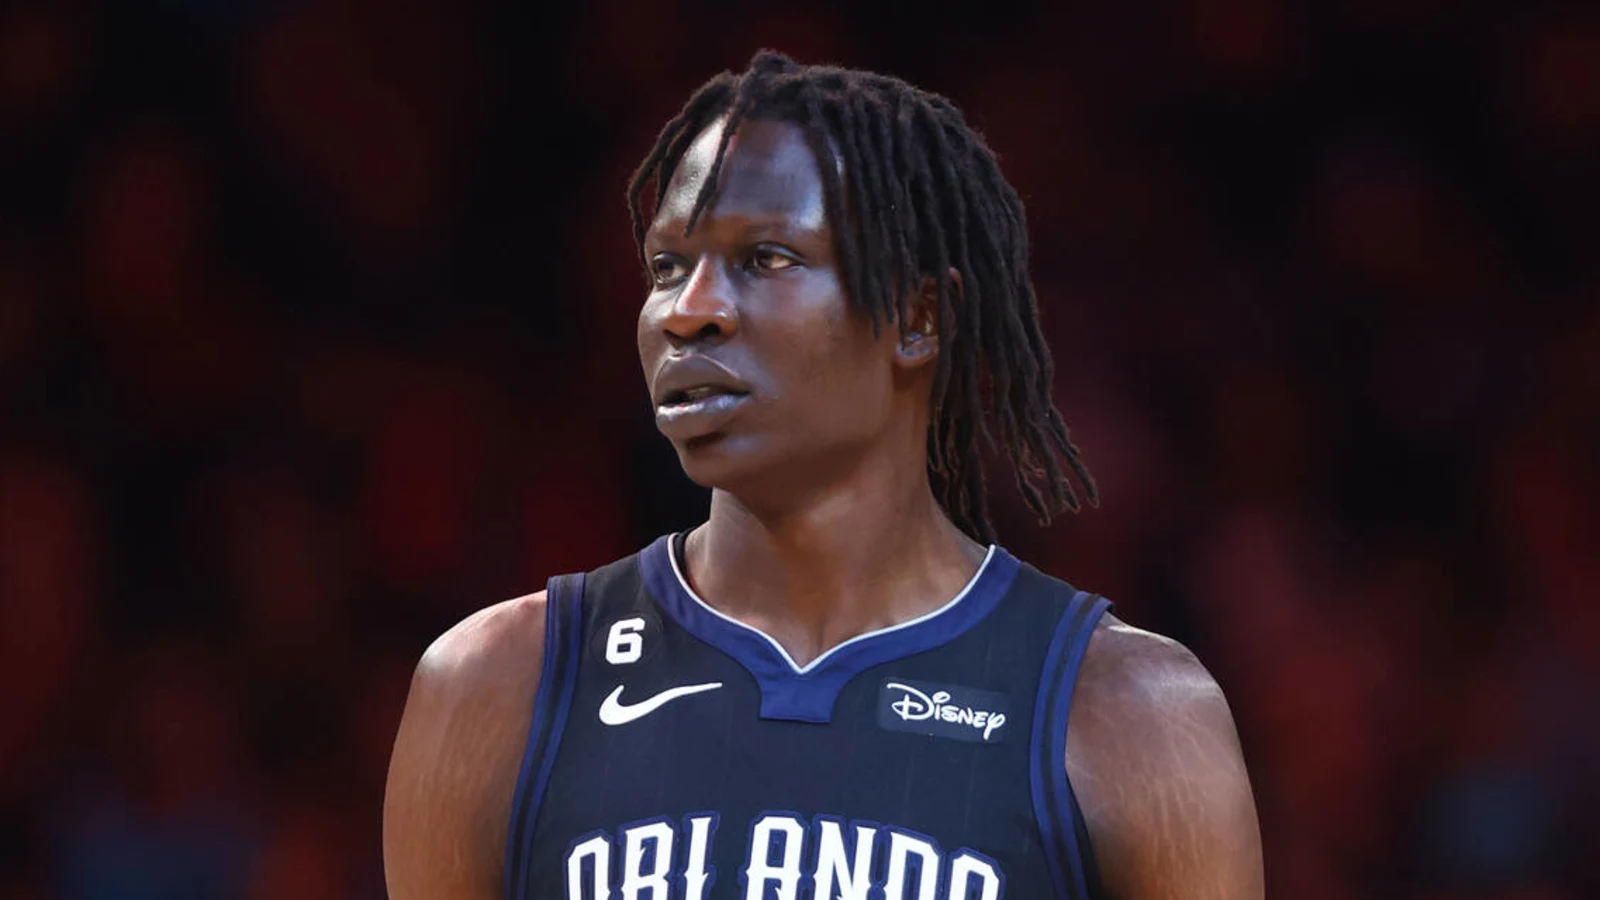 The Golden State Warriors are leaders among teams that could land Bol Bol